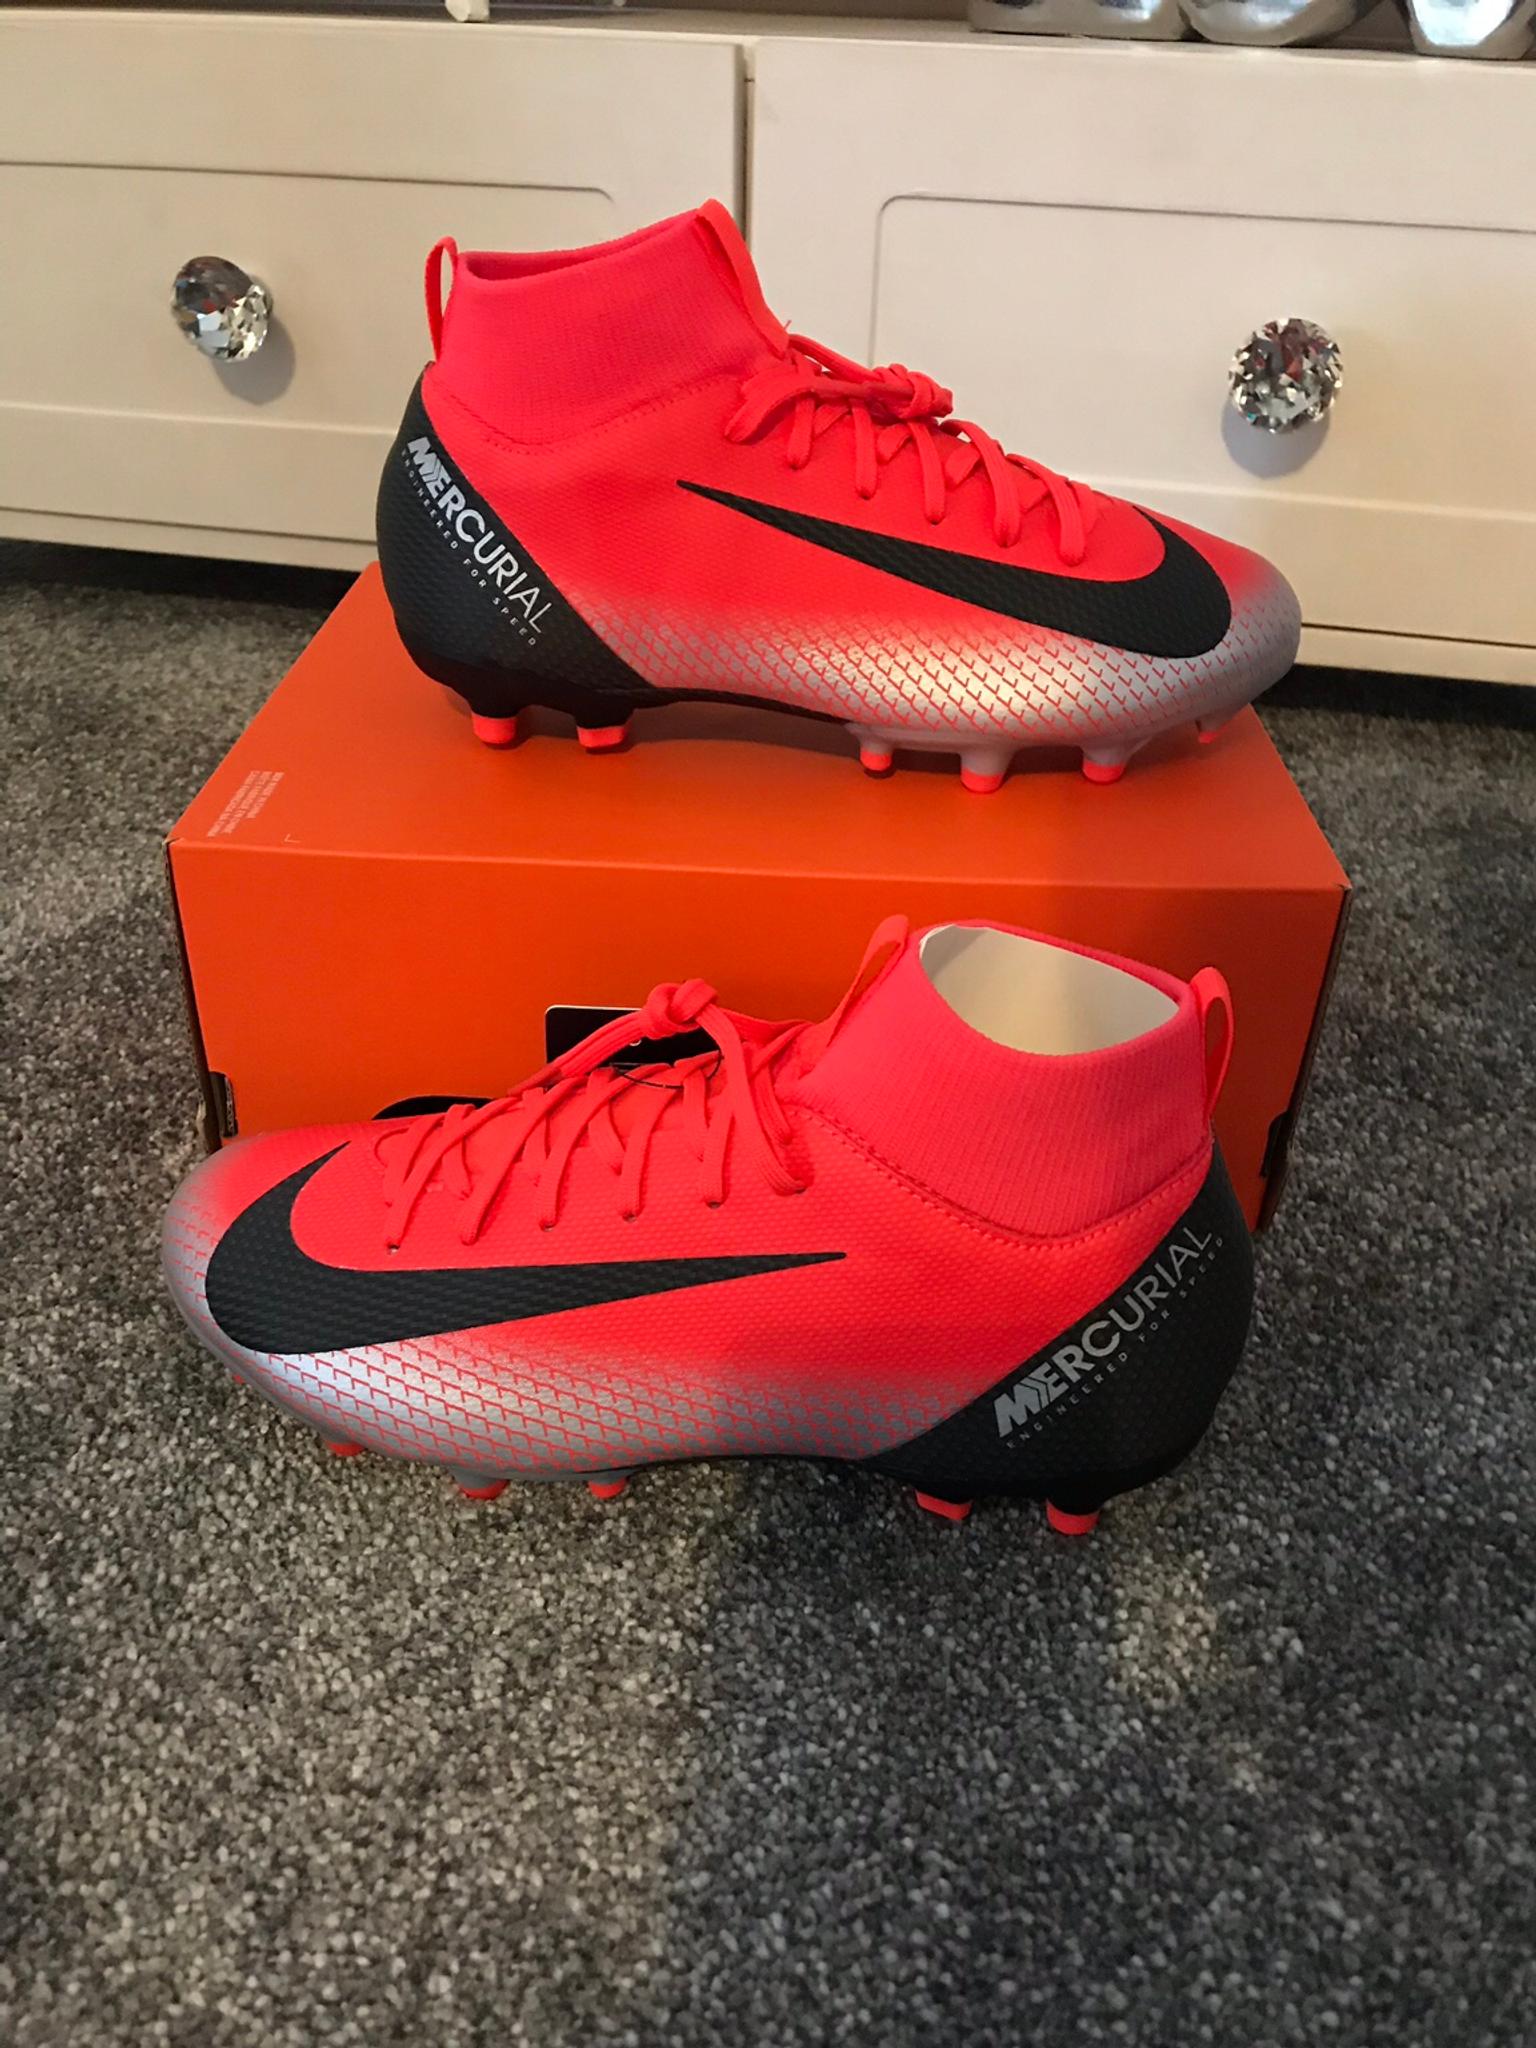 nike football boots size 3